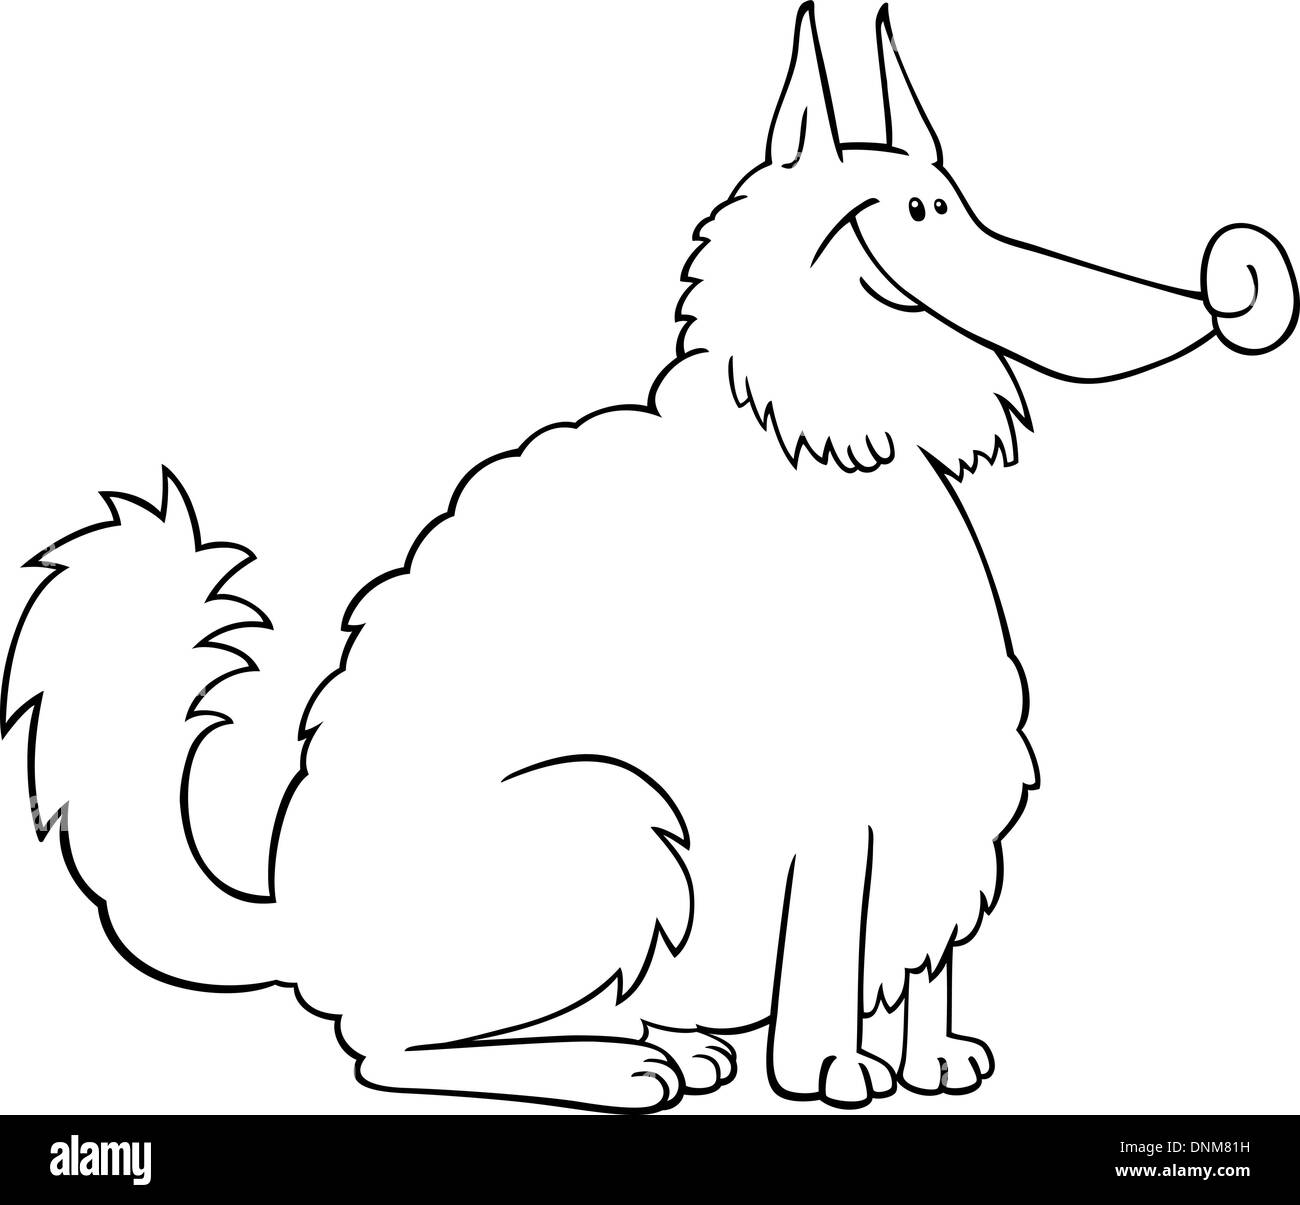 Black and White Cartoon Illustration of Shaggy Purebred Eskimo Dog or Spitz or Sheepdog for Coloring Book or Coloring Page Stock Vector